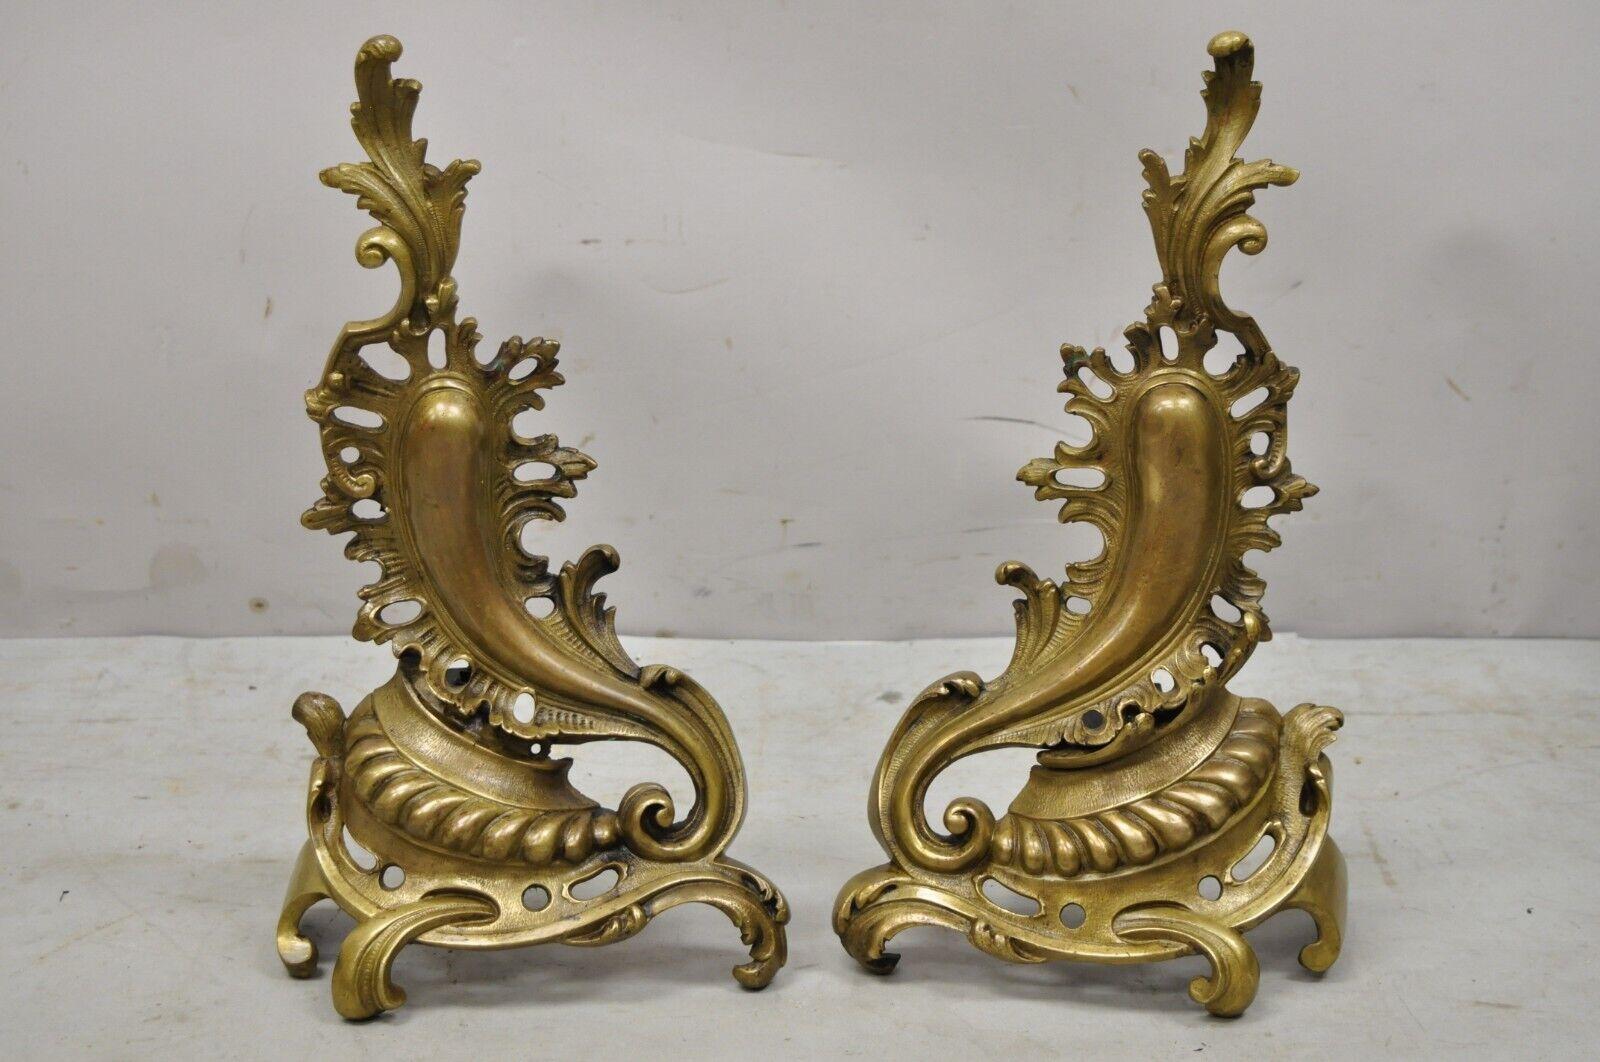 Vintage French Rococo Style Bronze Acanthus Leafy Scroll Andirons, Pair For Sale 6